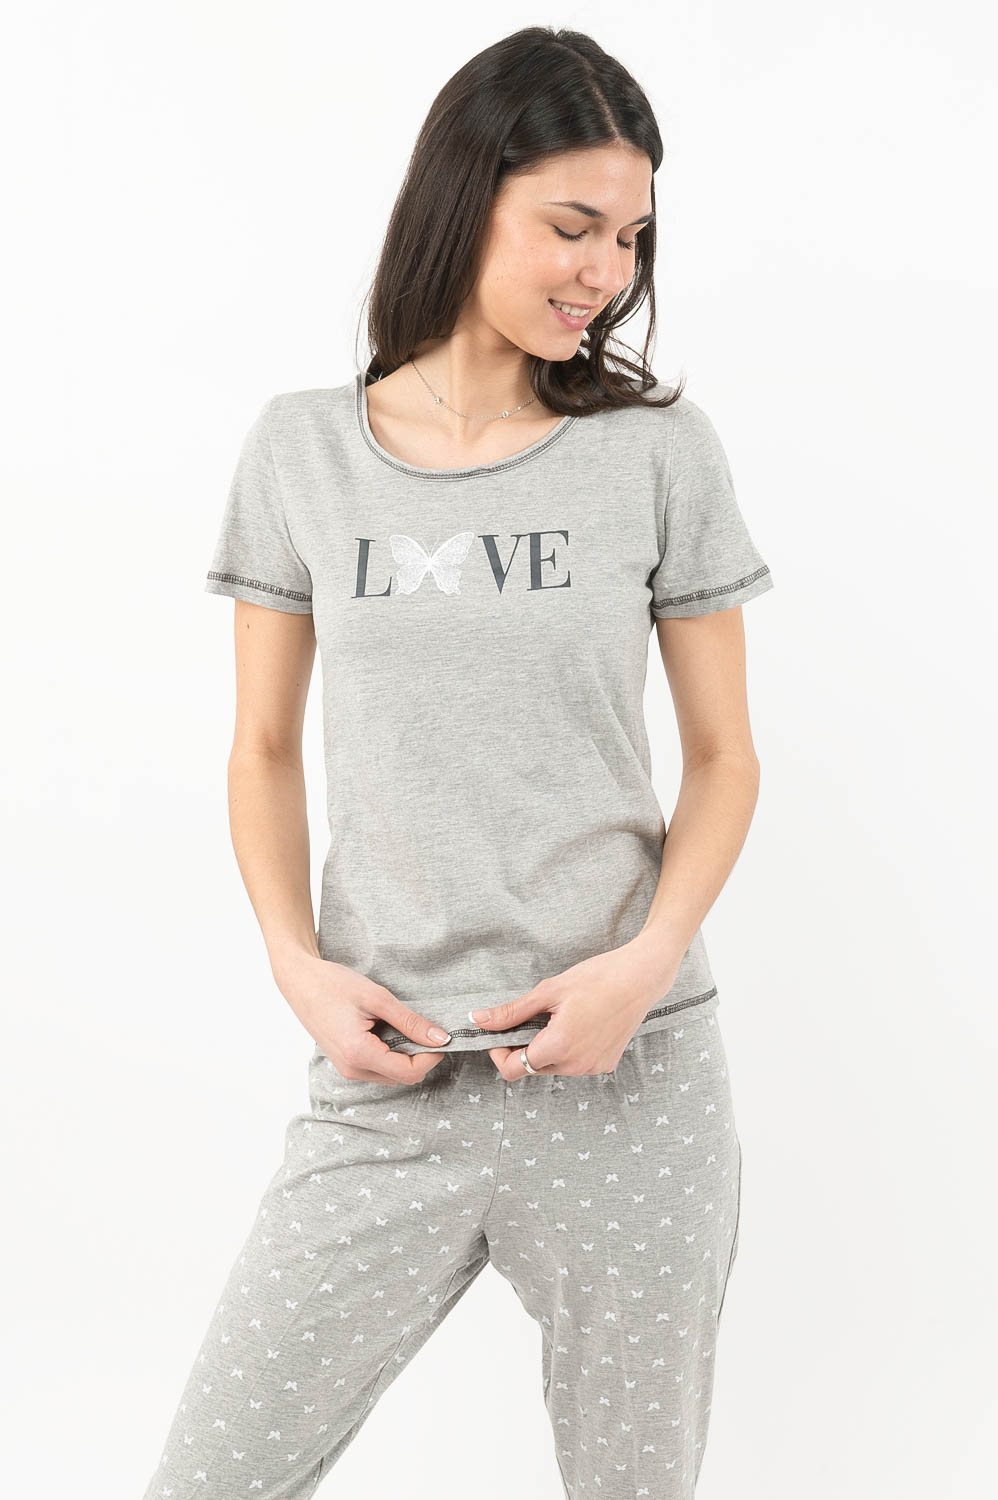 Charmour - Cotton knit capri PJ set with printed graphic - Butterfly LOVE